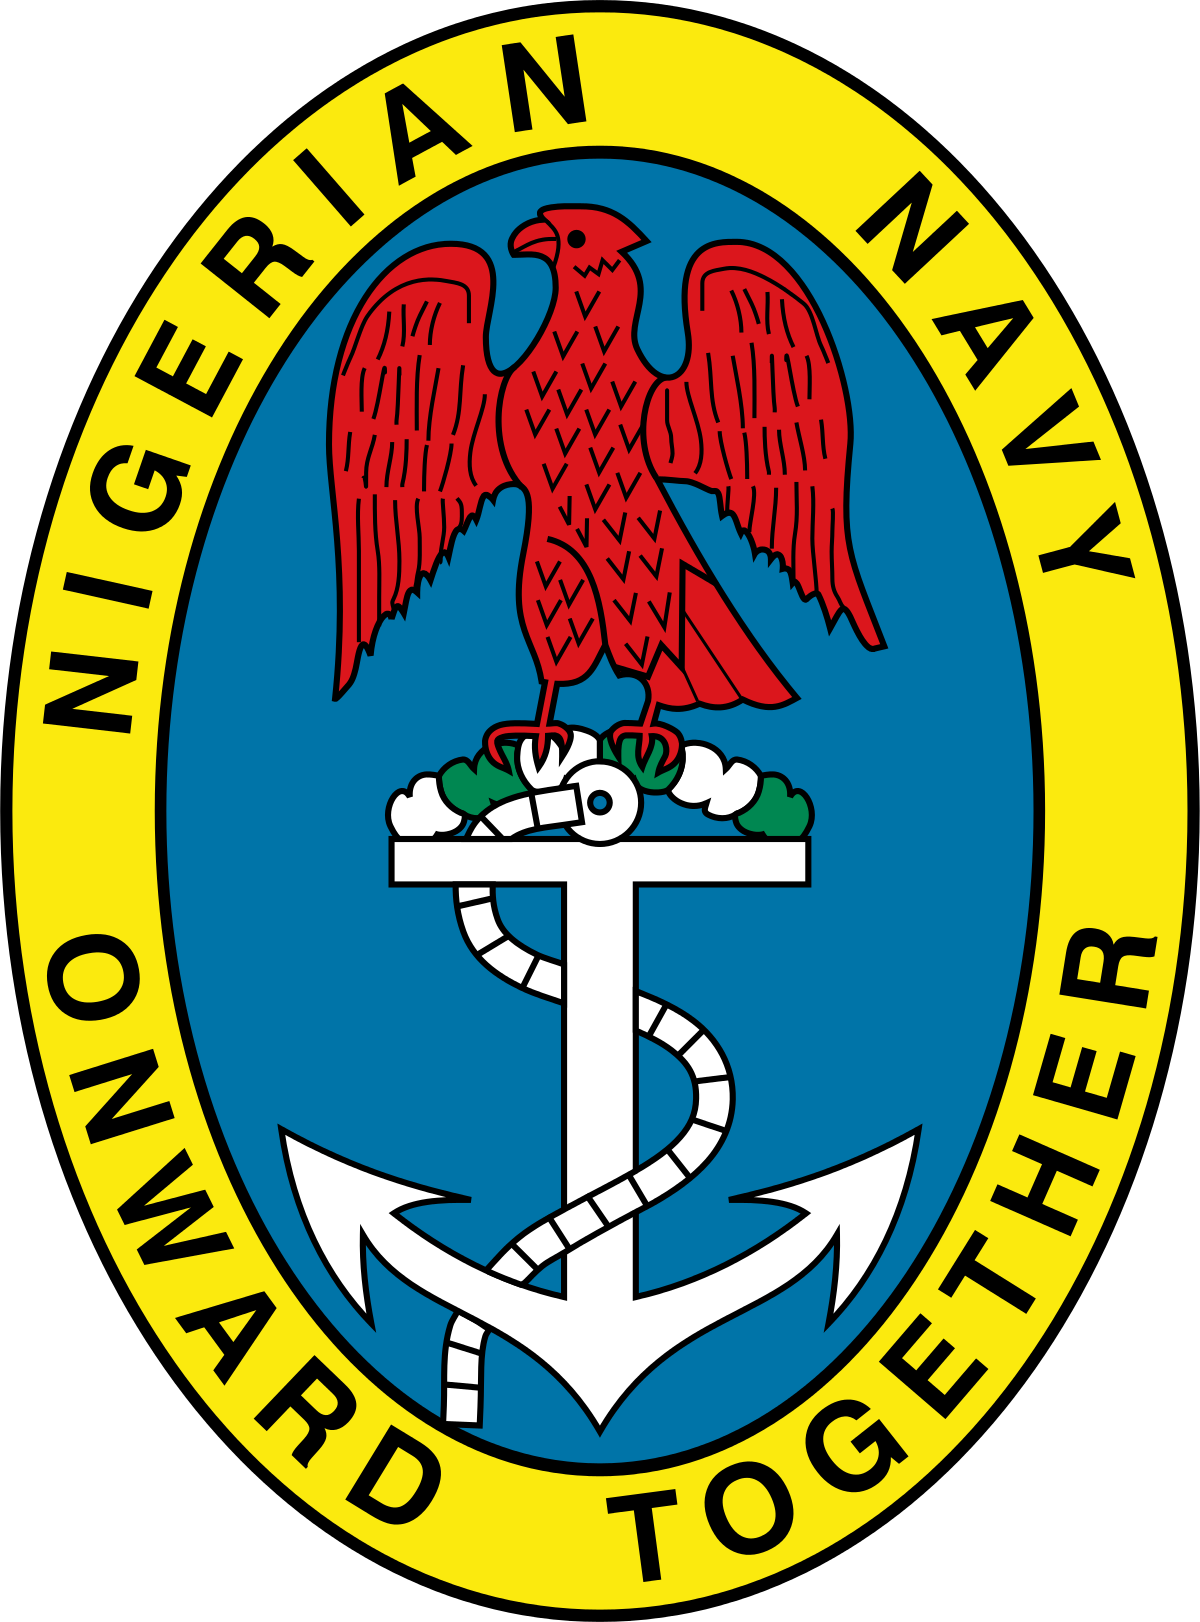 Navy redeploys 11 Rear Admirals and 14 Commodores